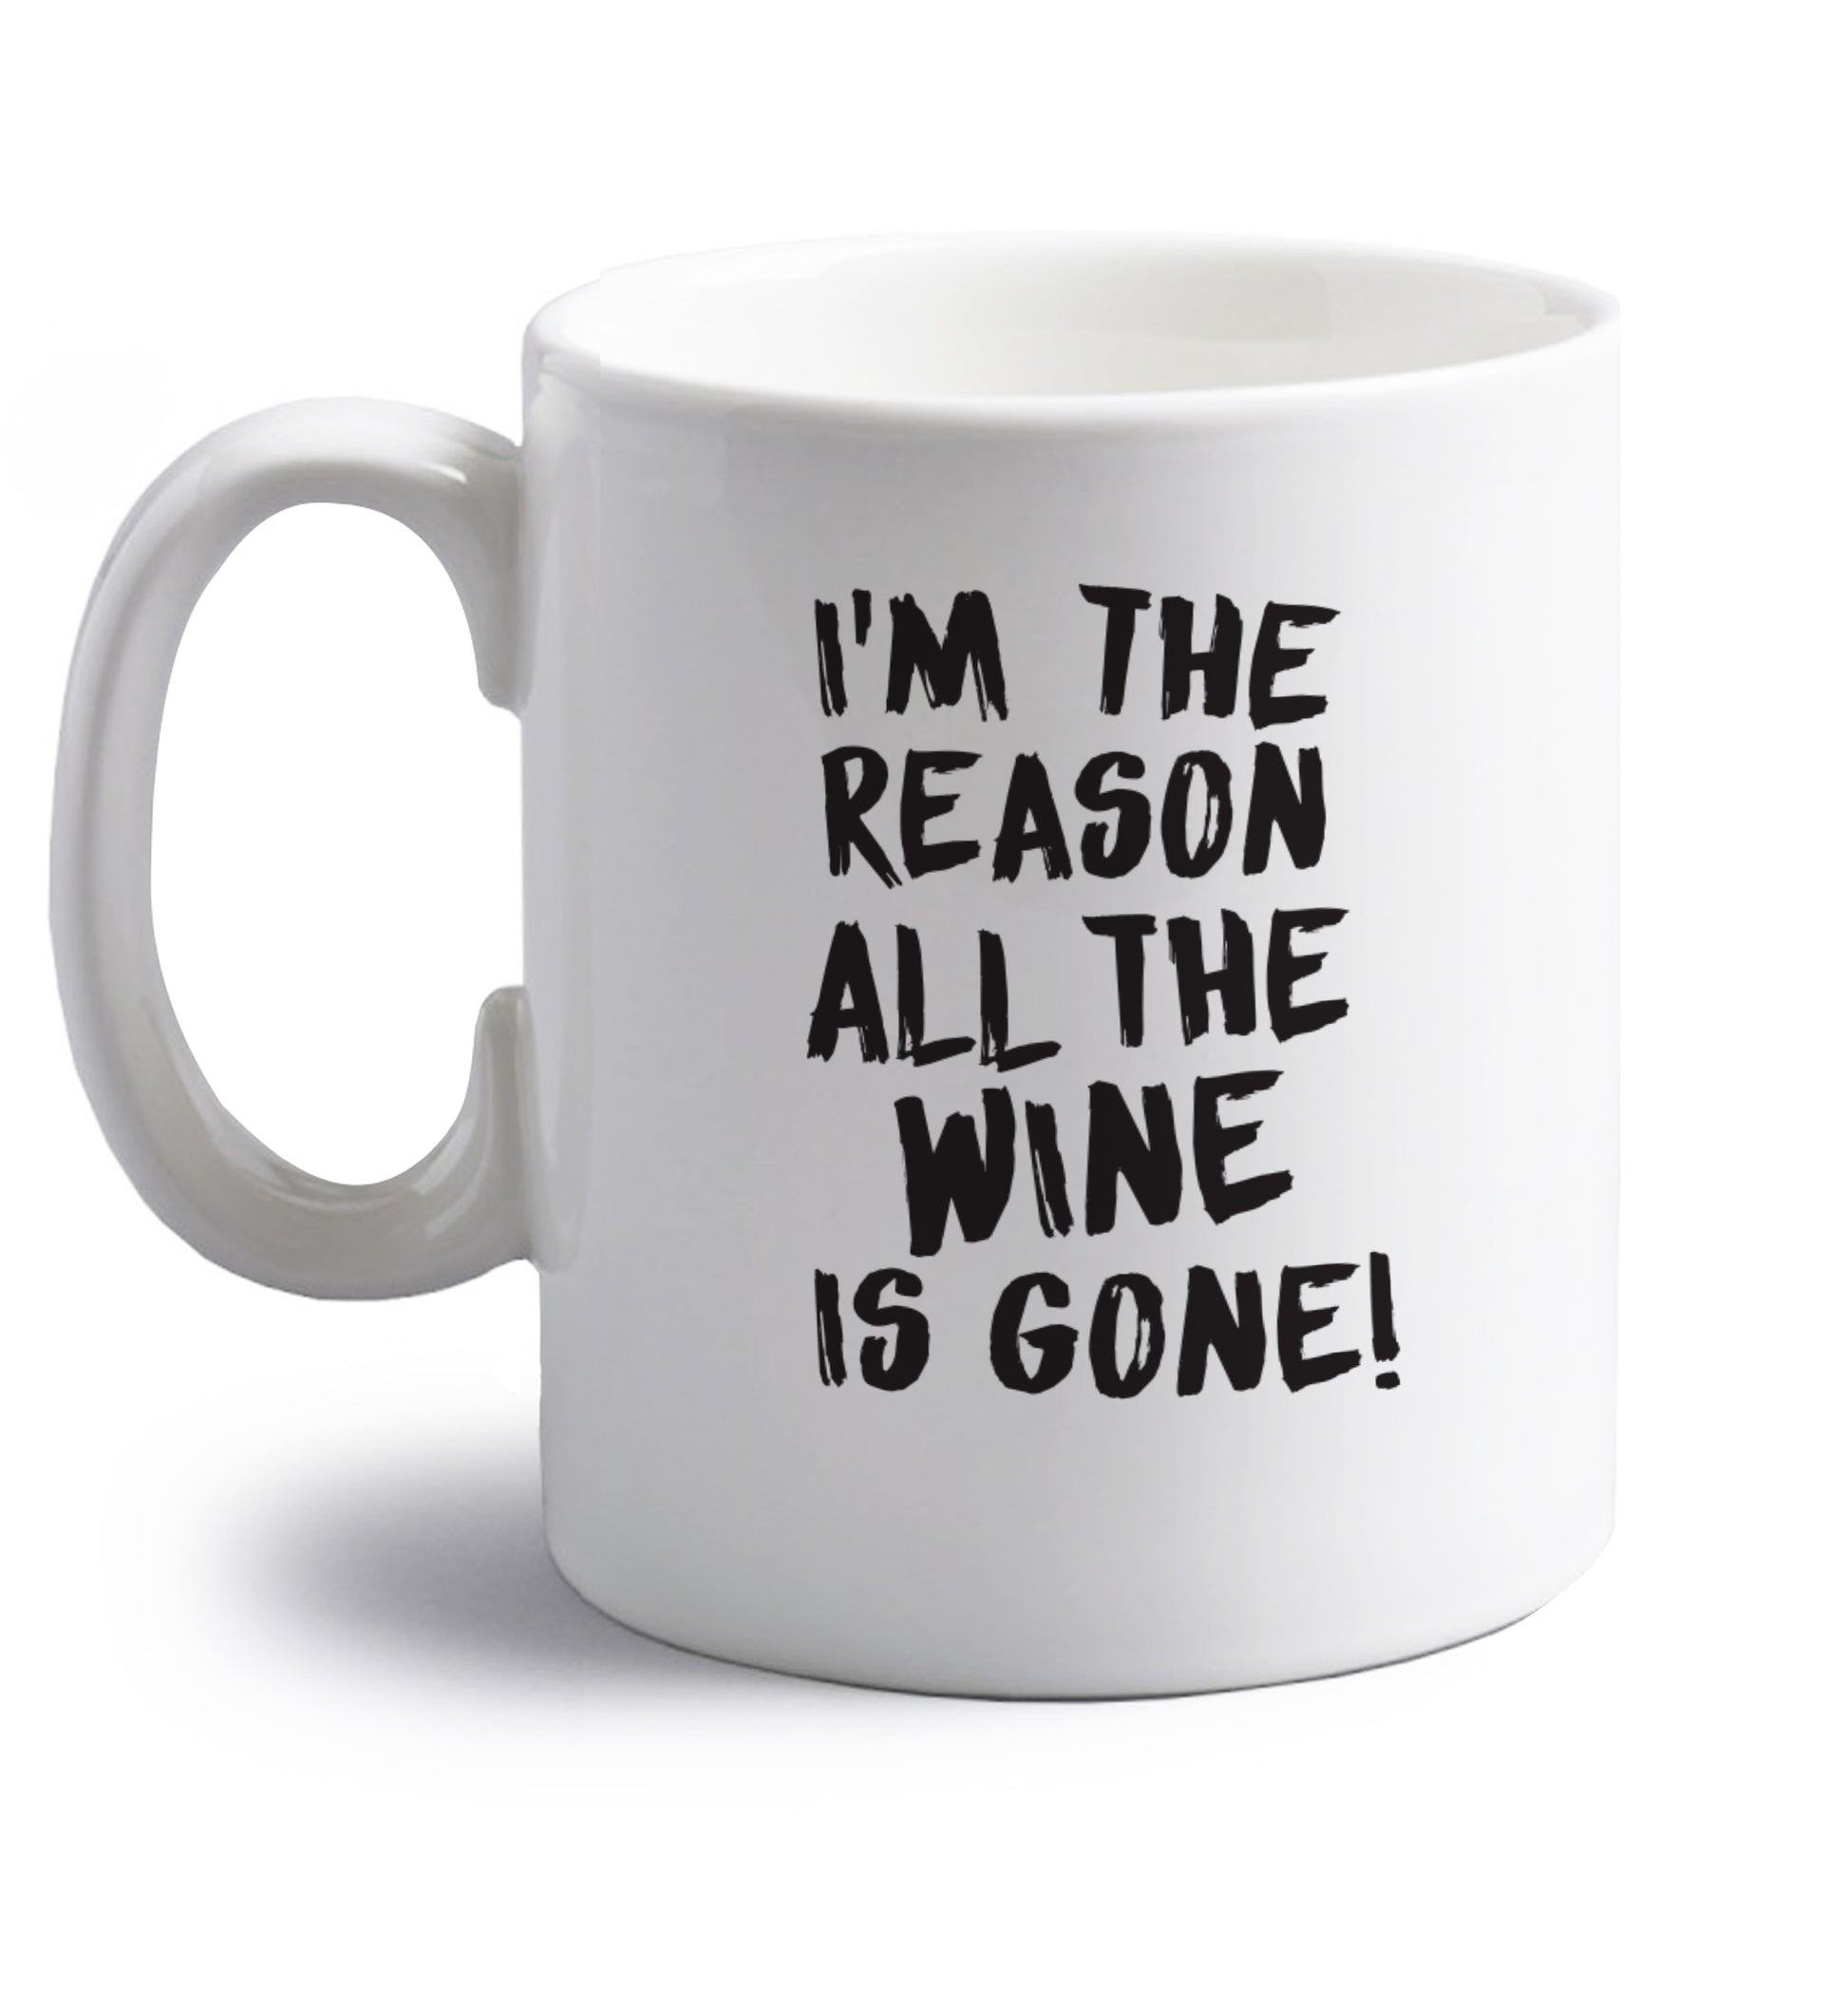 I'm the reason all the wine is gone right handed white ceramic mug 